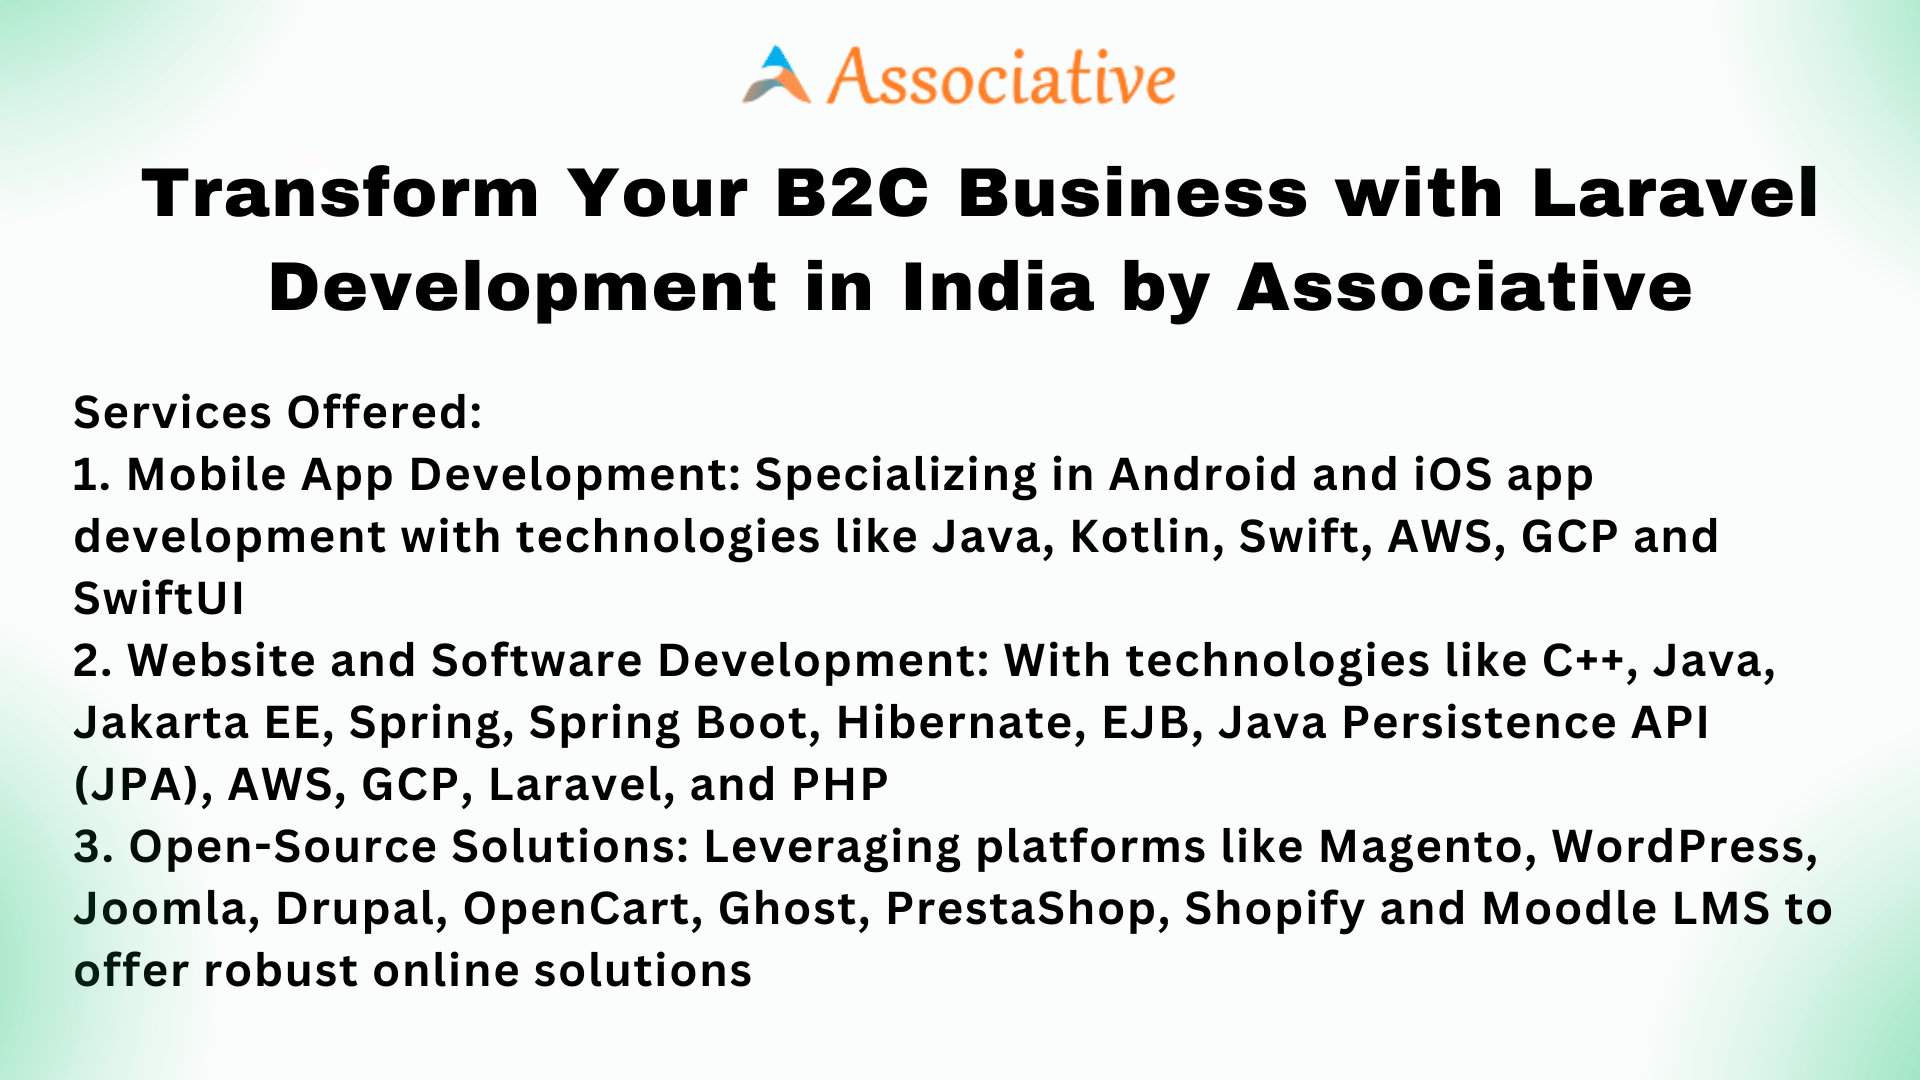 Transform Your B2C Business with Laravel Development in India by Associative